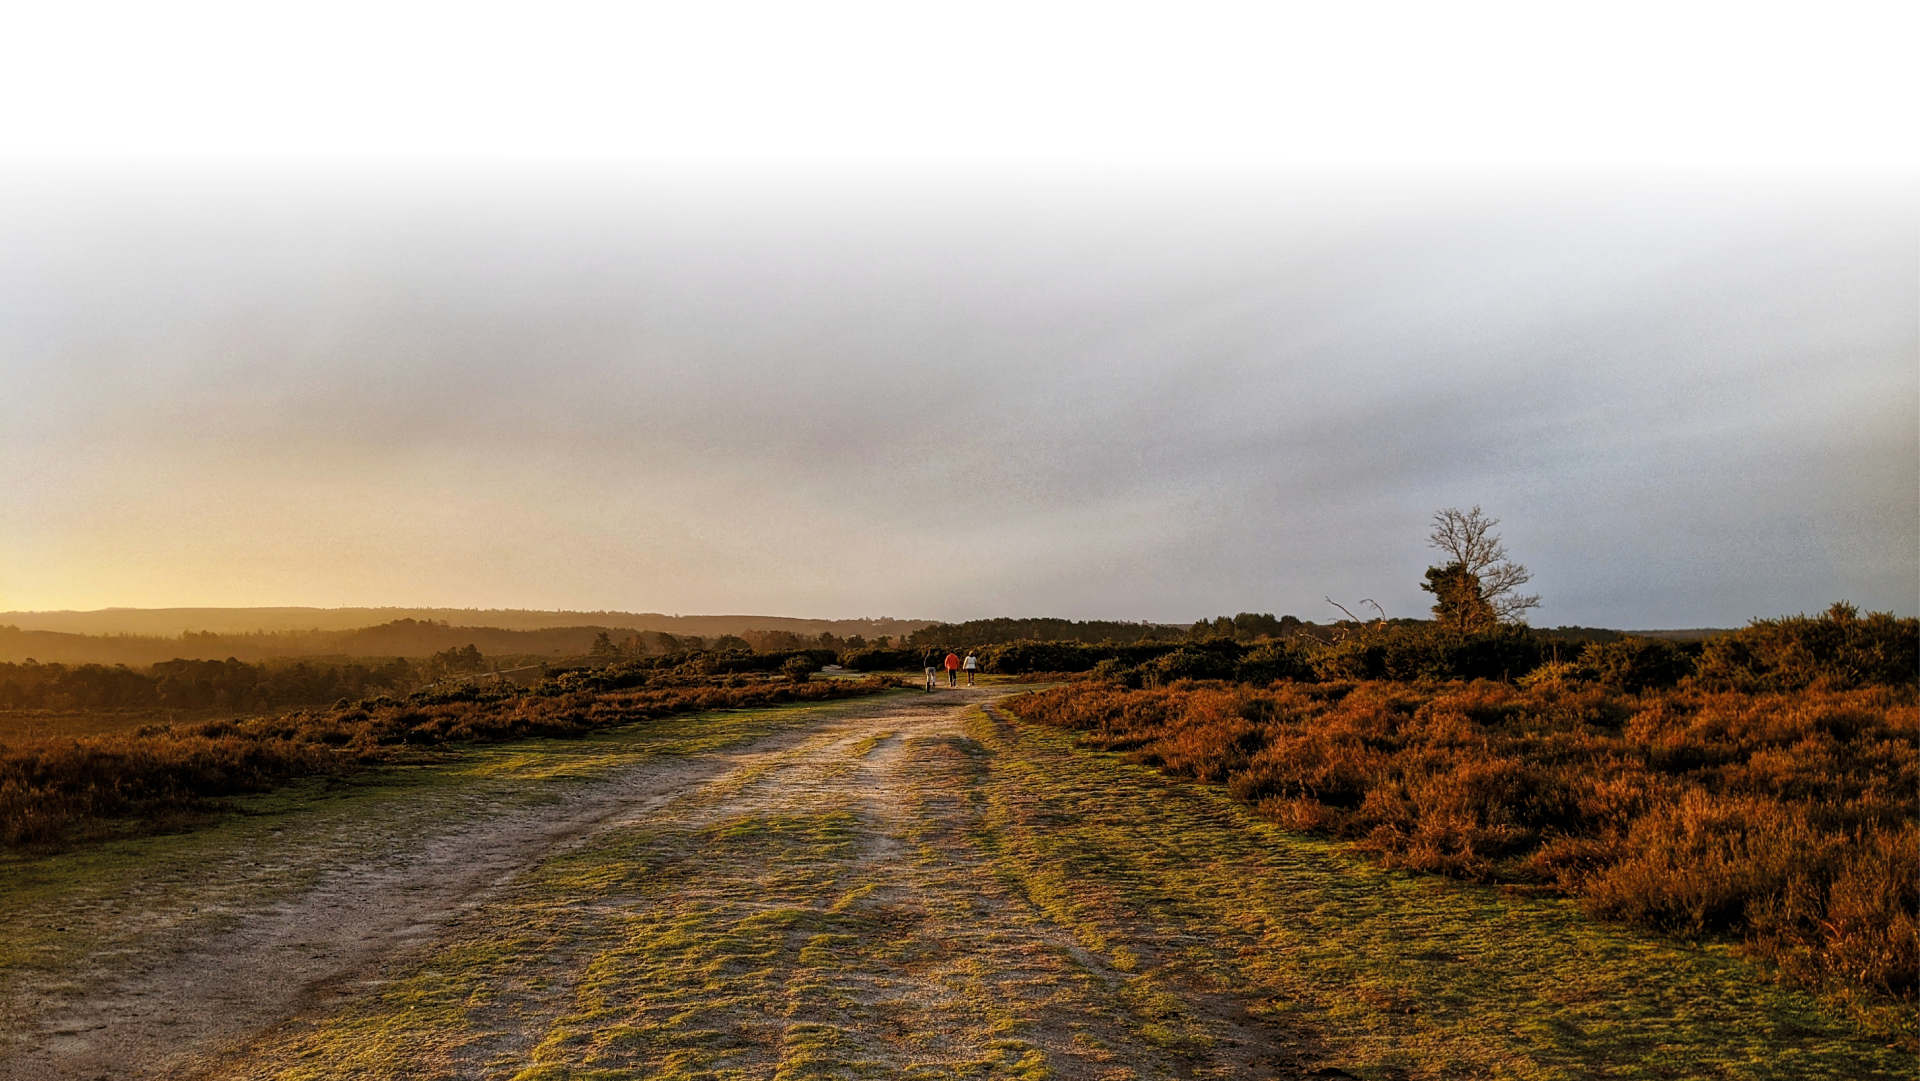 Three people walk long a wide path on the moors in the distance. The path is grassy and is bracketed with gorse which continues into the distance until it becomes forestry. It is sunset, golden hour, and the image is bathed in cool golden light.